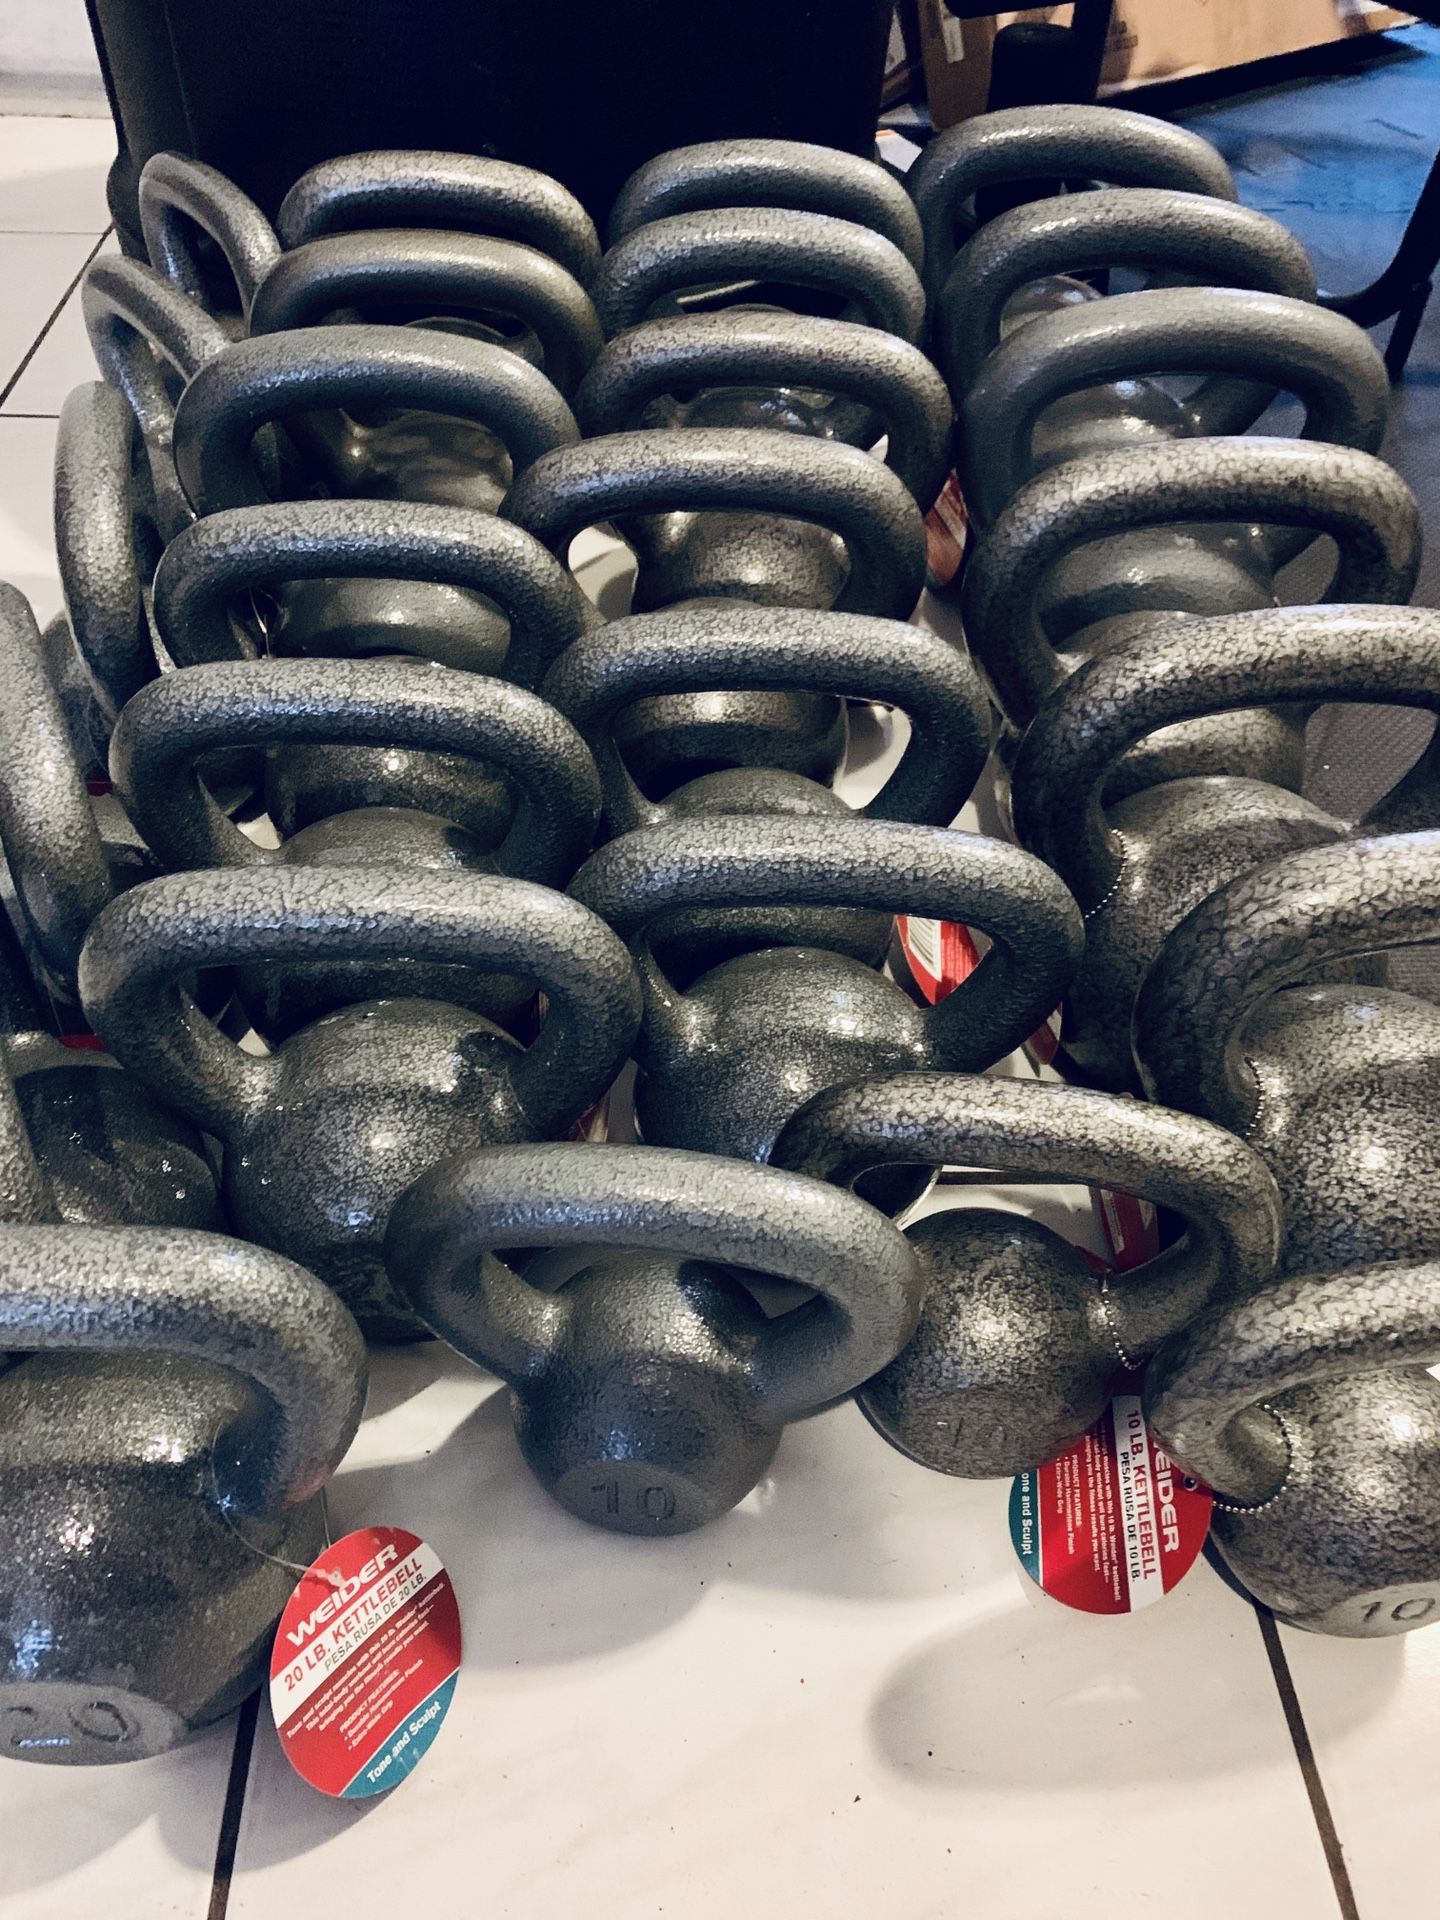 Kettlebell ( starting at 5lbs for $10)